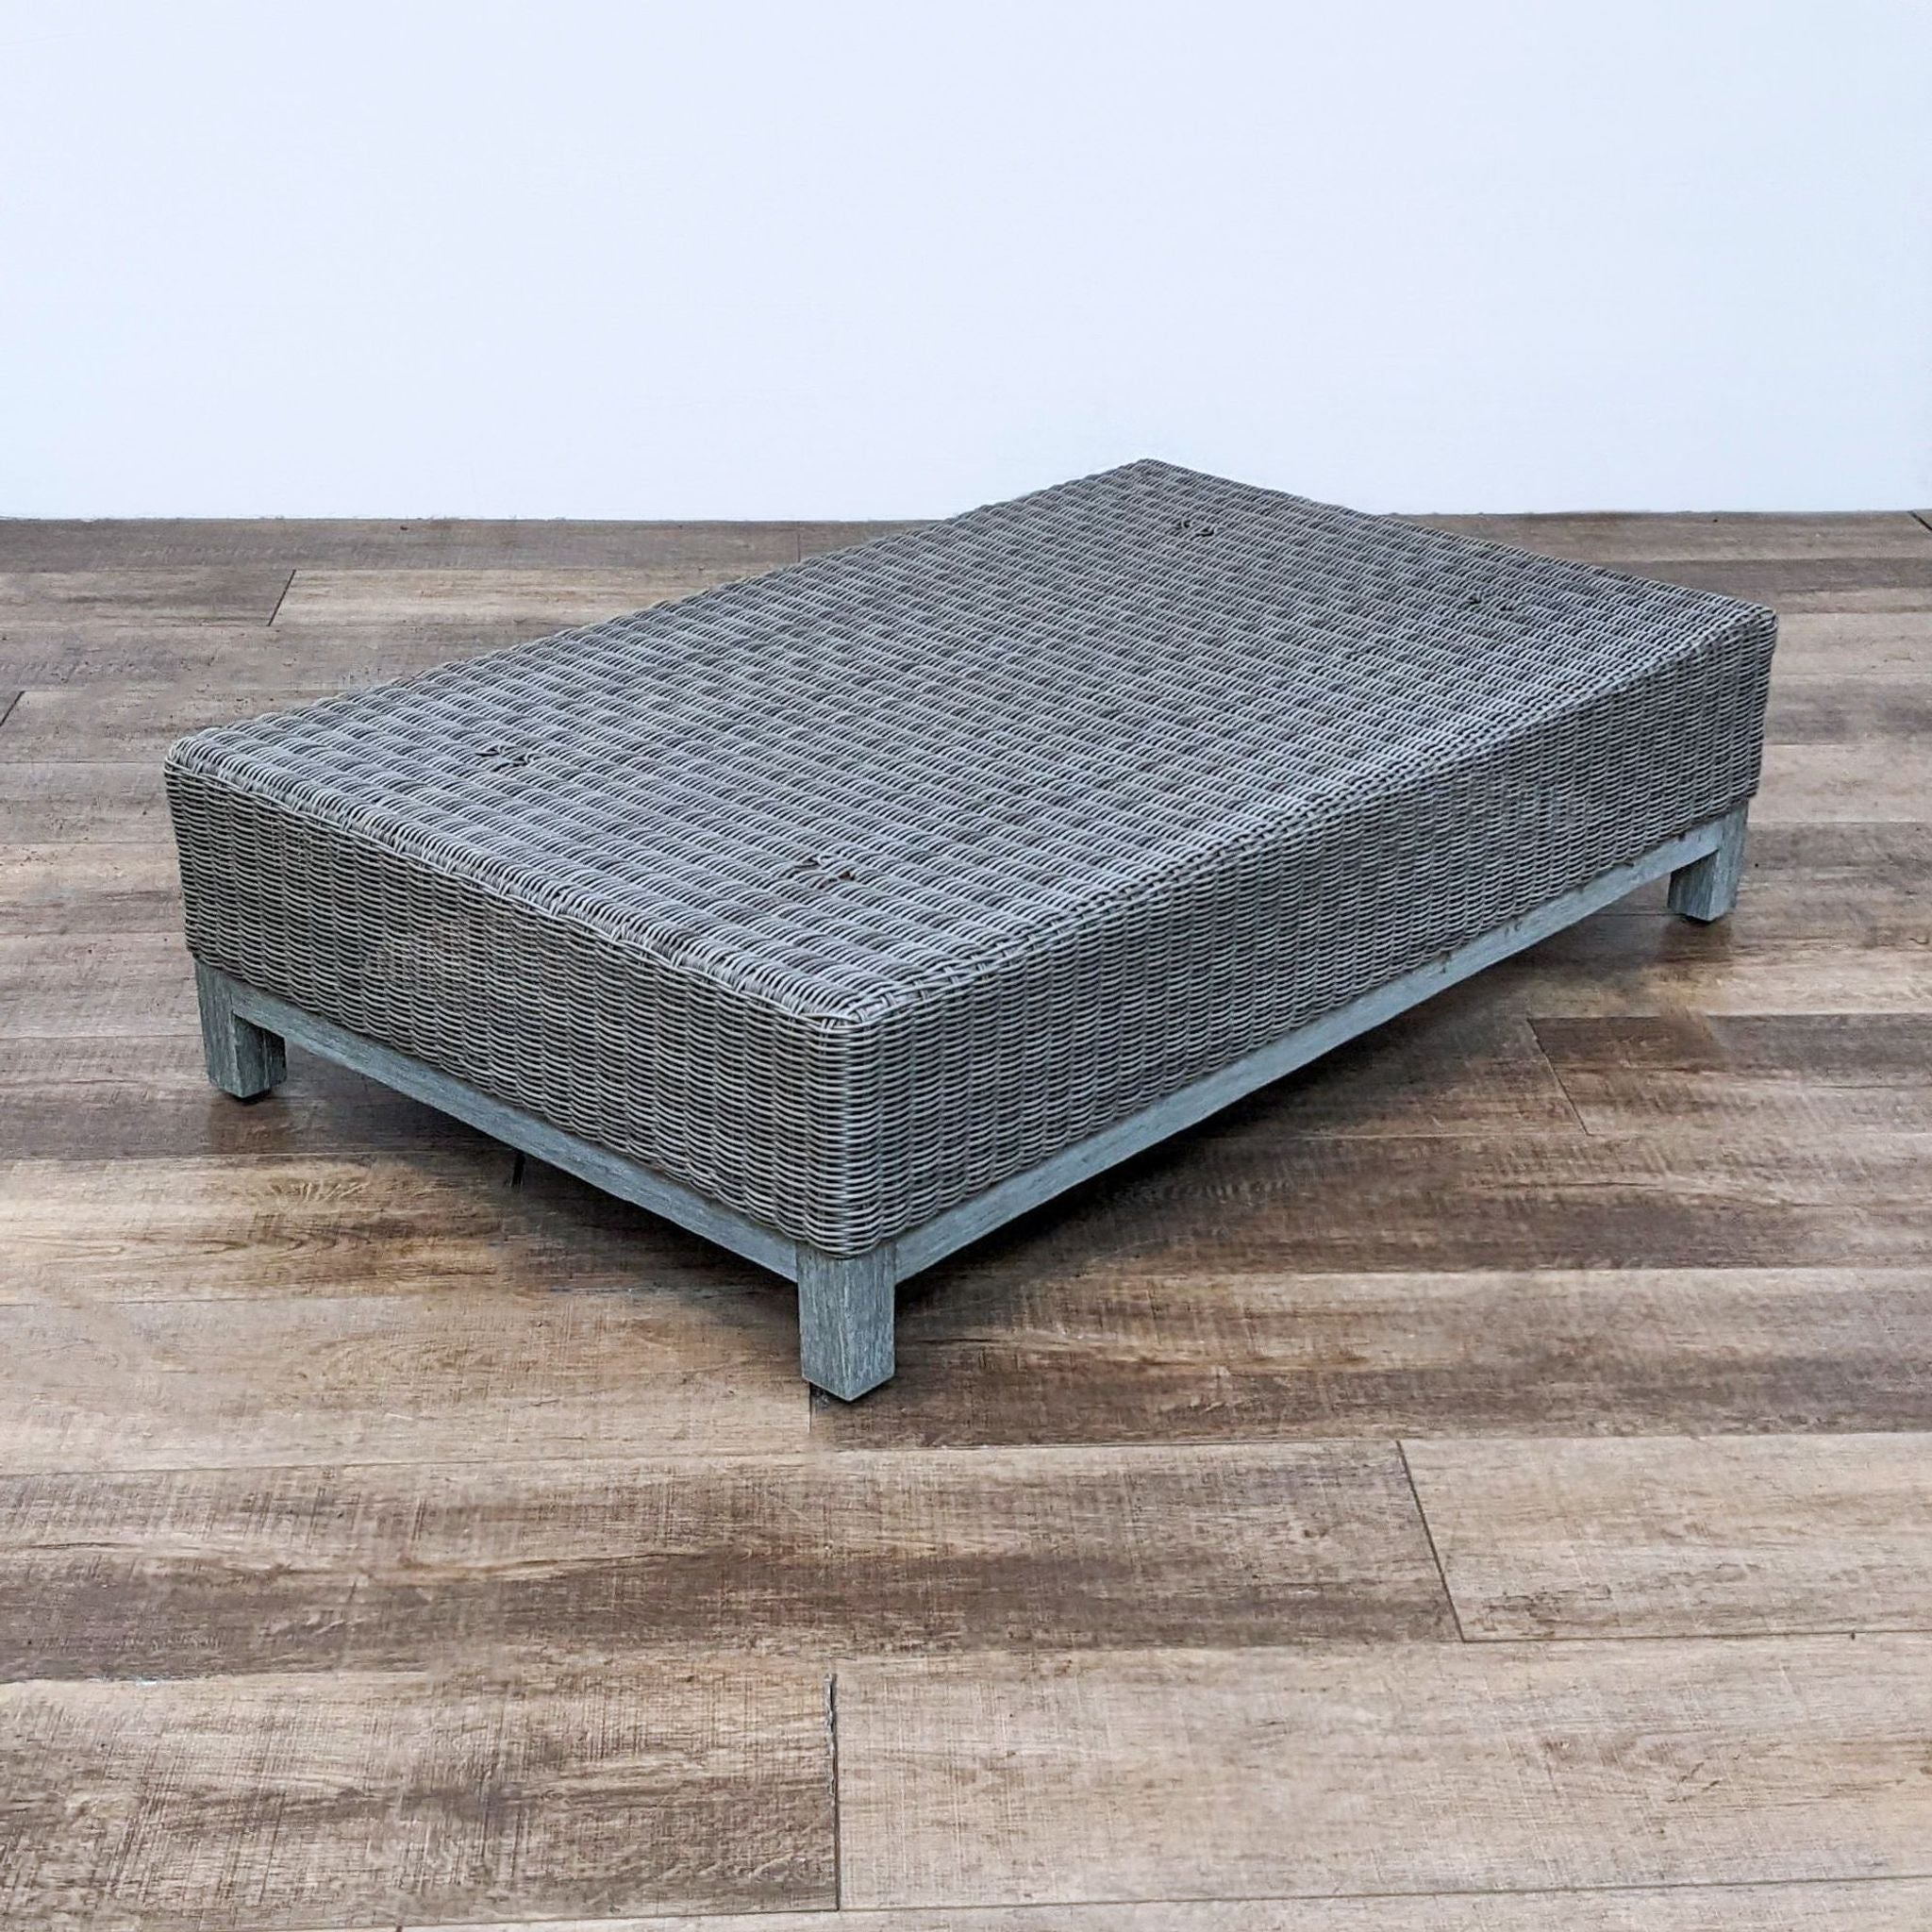 Woven wicker rectangular coffee table by Restoration Hardware, featuring a low and wide design with a distressed wood foundation.